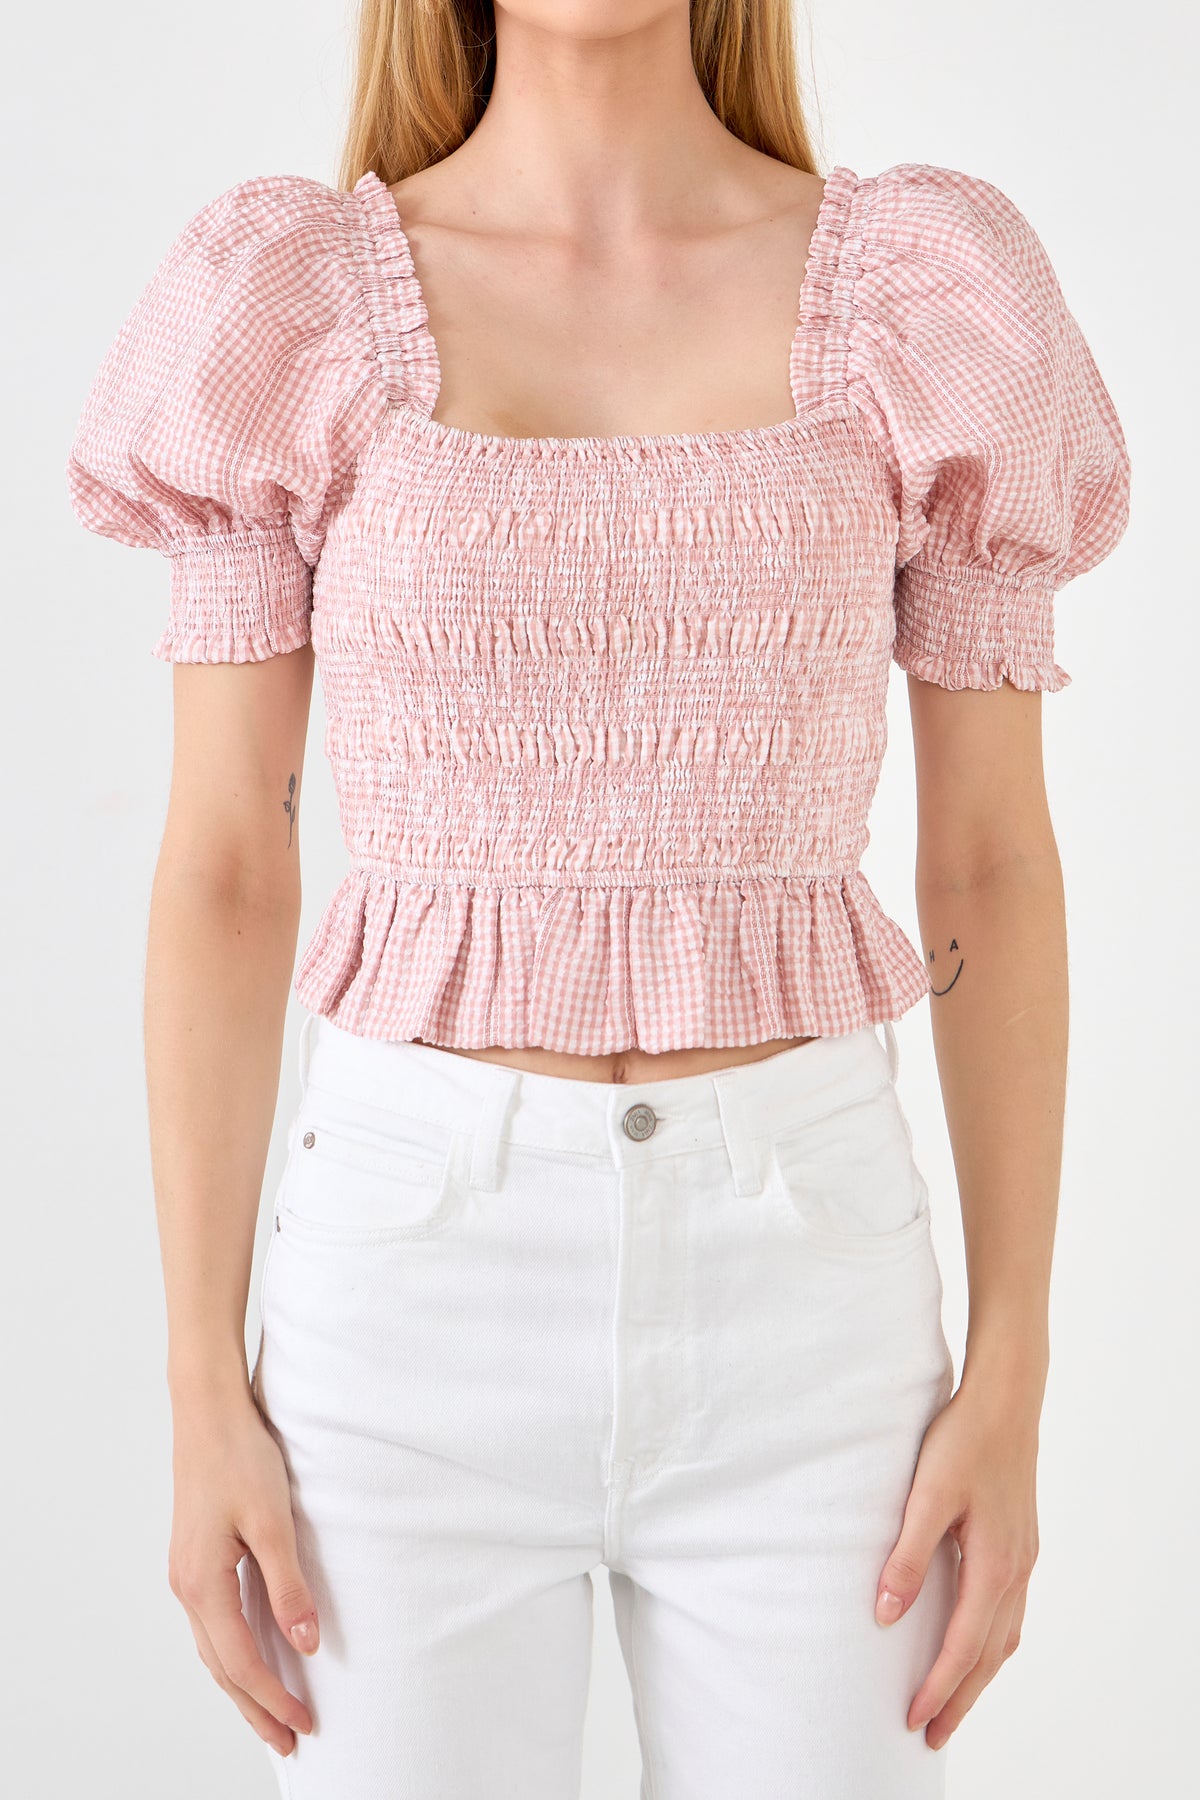 FREE THE ROSES - Smocked Top - TOPS available at Objectrare